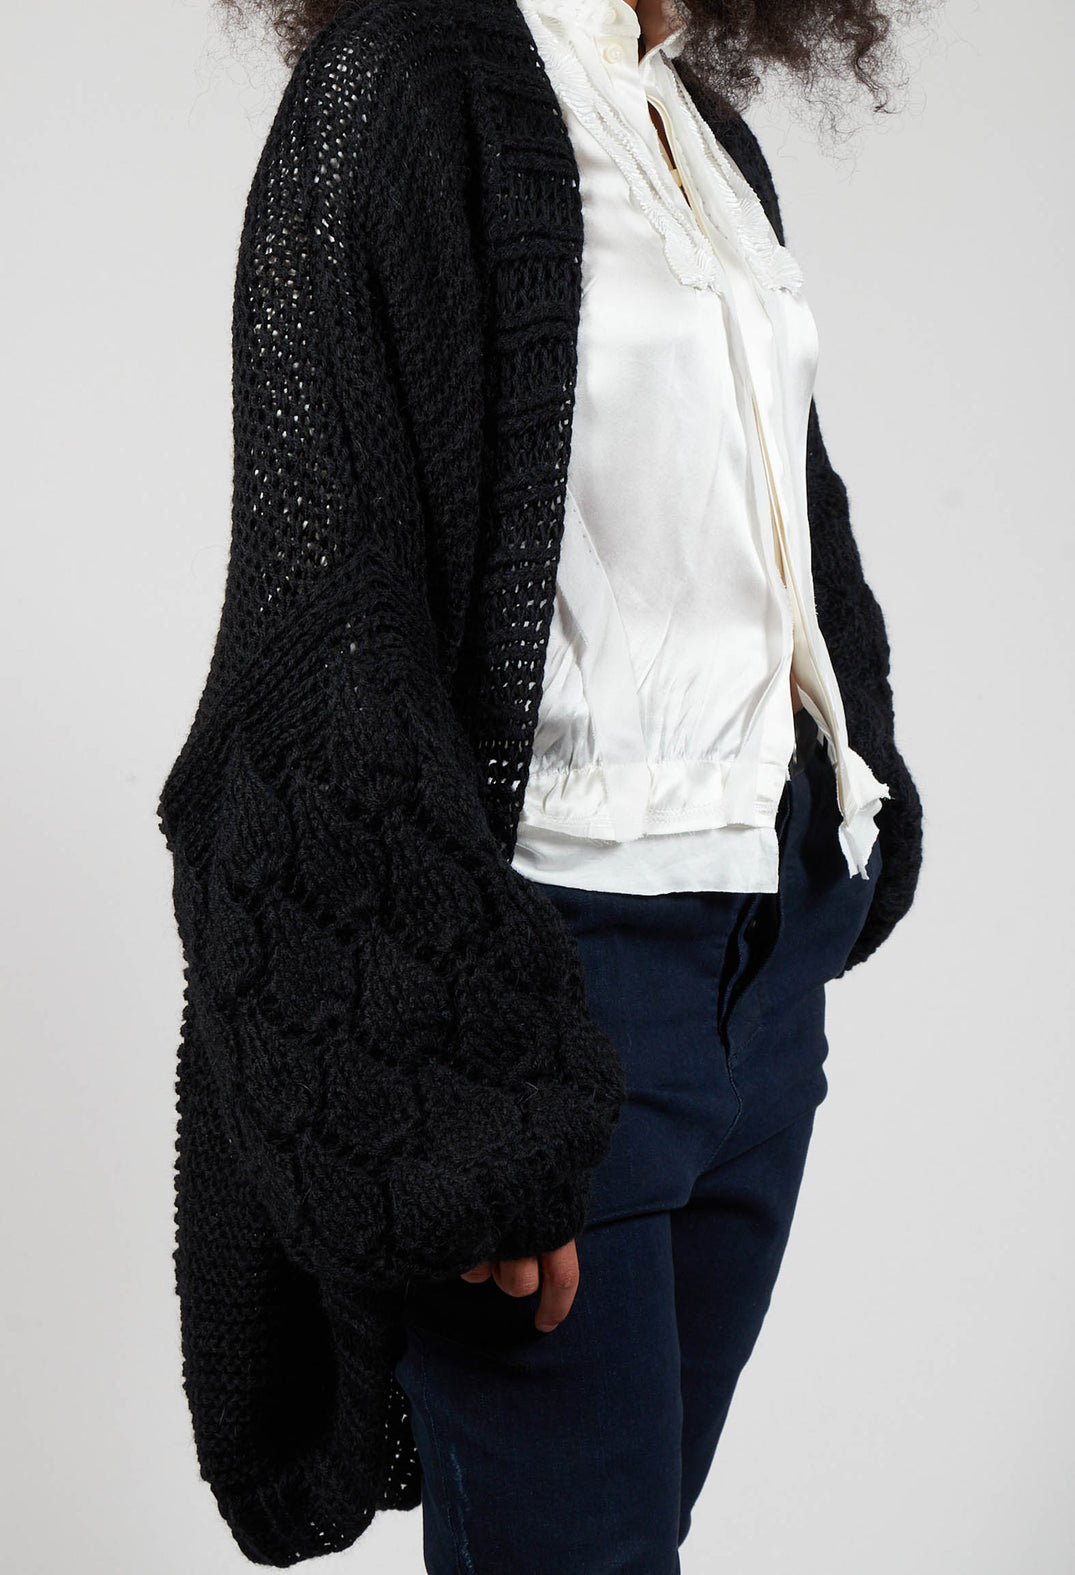 Longline Hand Knitted Cardigan in Black